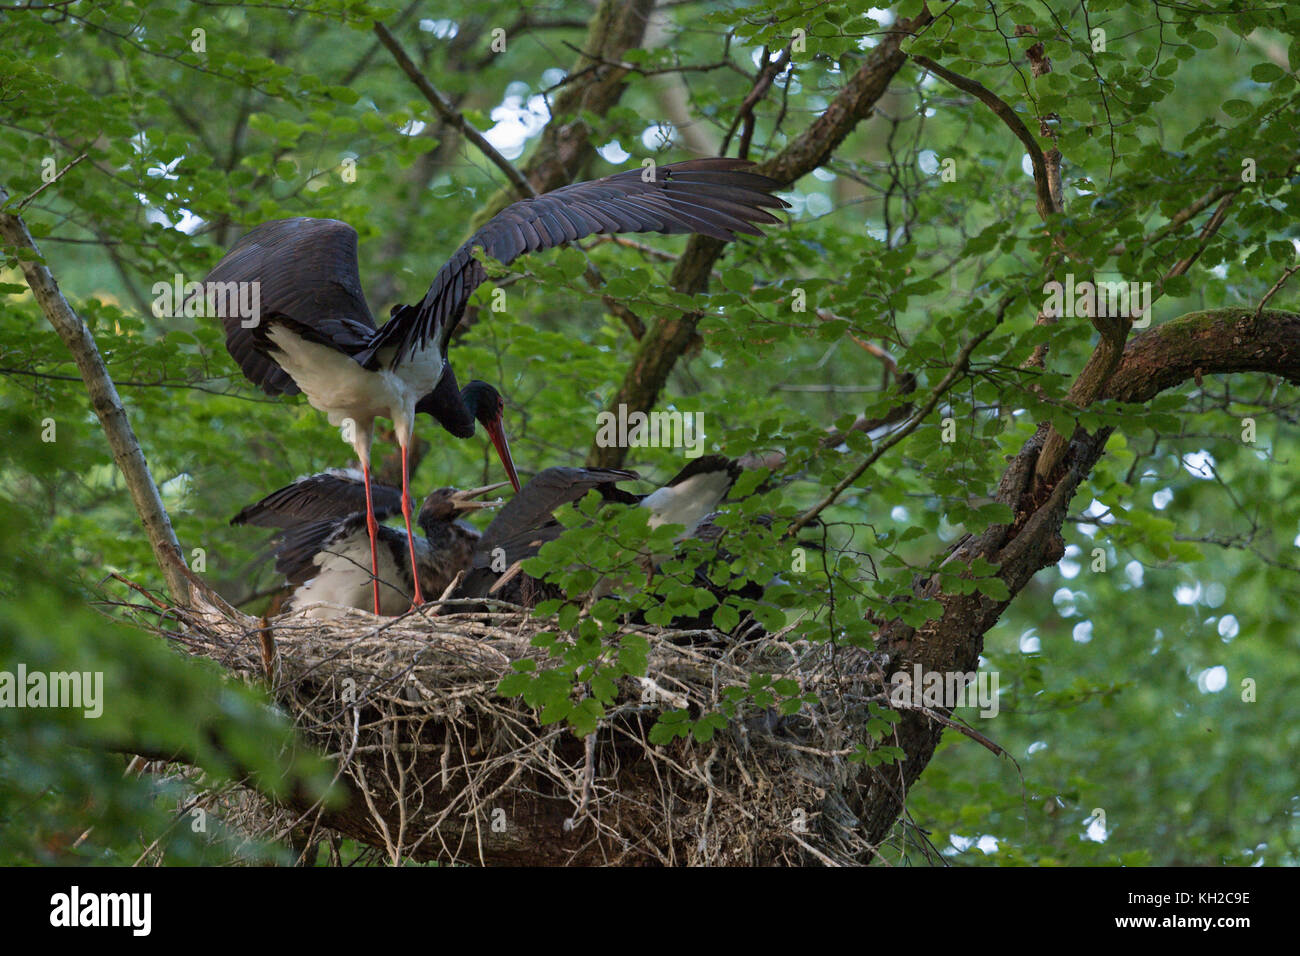 Black Stork (Ciconia nigra) at their nesting site, adult feeding its chicks, high up in a huge old beech tree, hidden, secretive, wildlife, Europe. Stock Photo